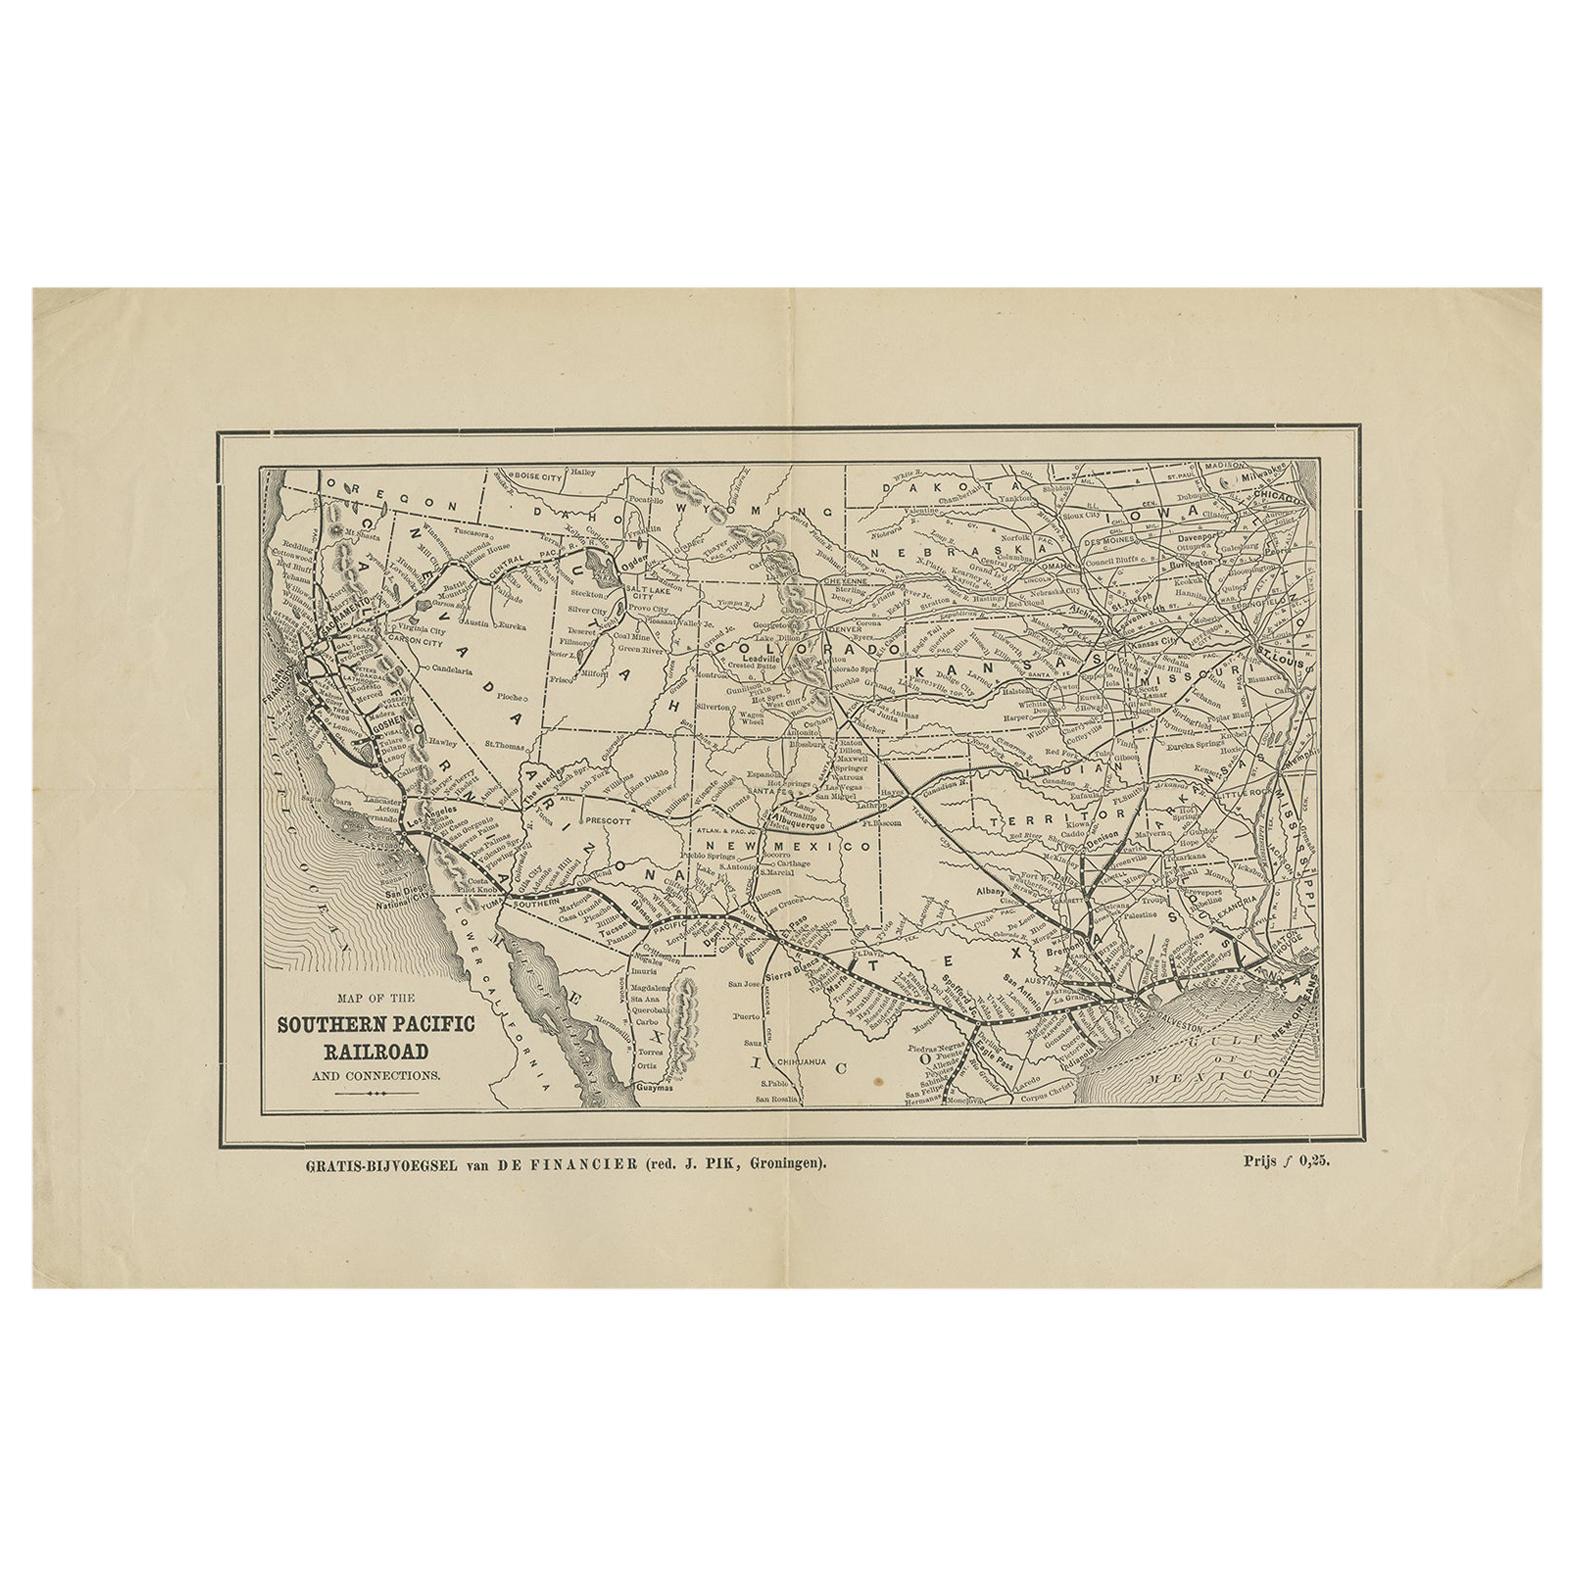 Antique Map of the Southern Pacific Railroad, circa 1880